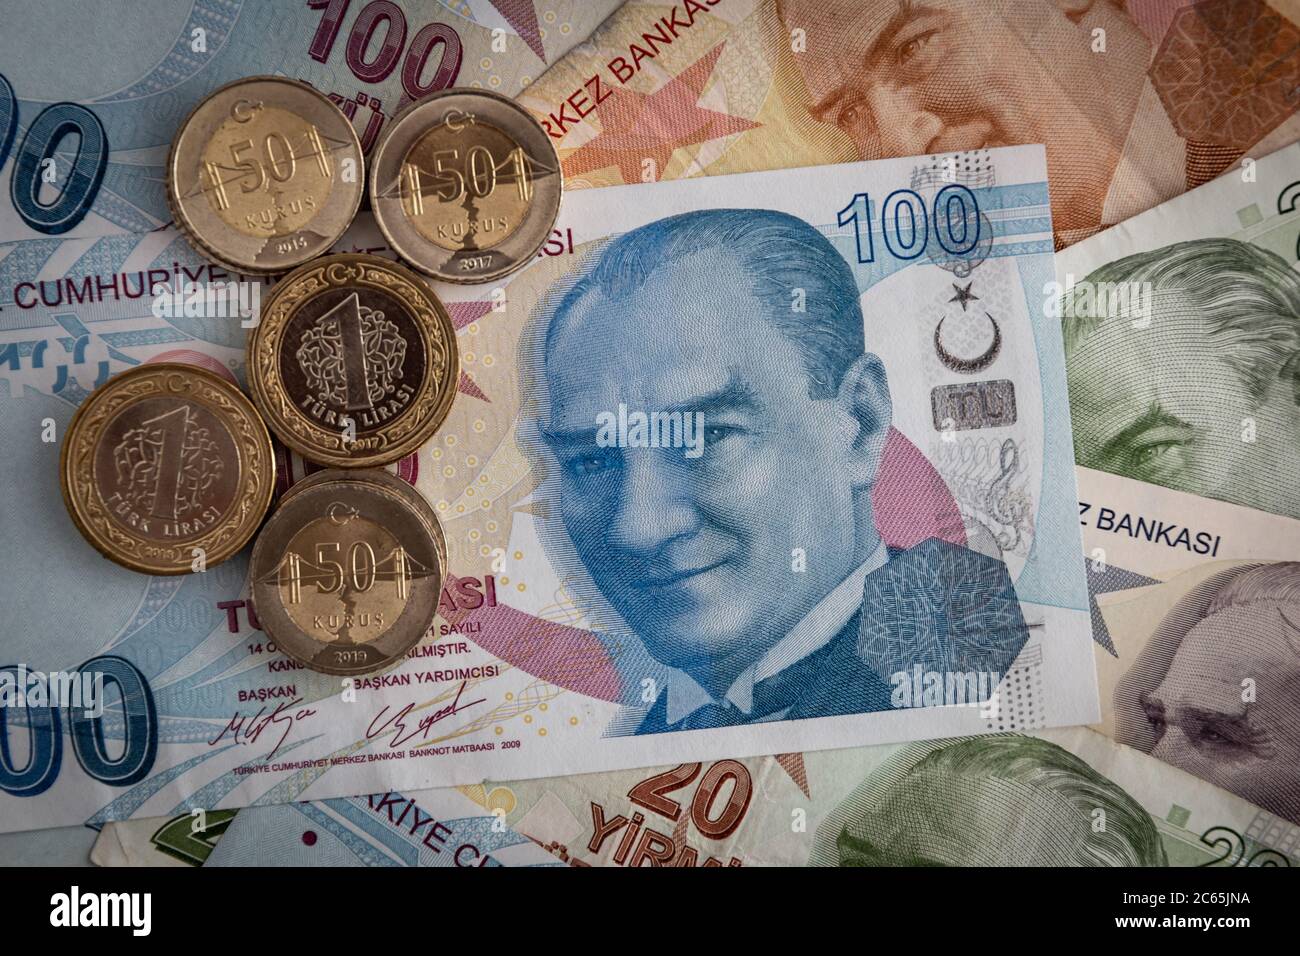 Bunch of Various Turkish Currency Lira Banknotes and Coins Stock Photo -  Alamy